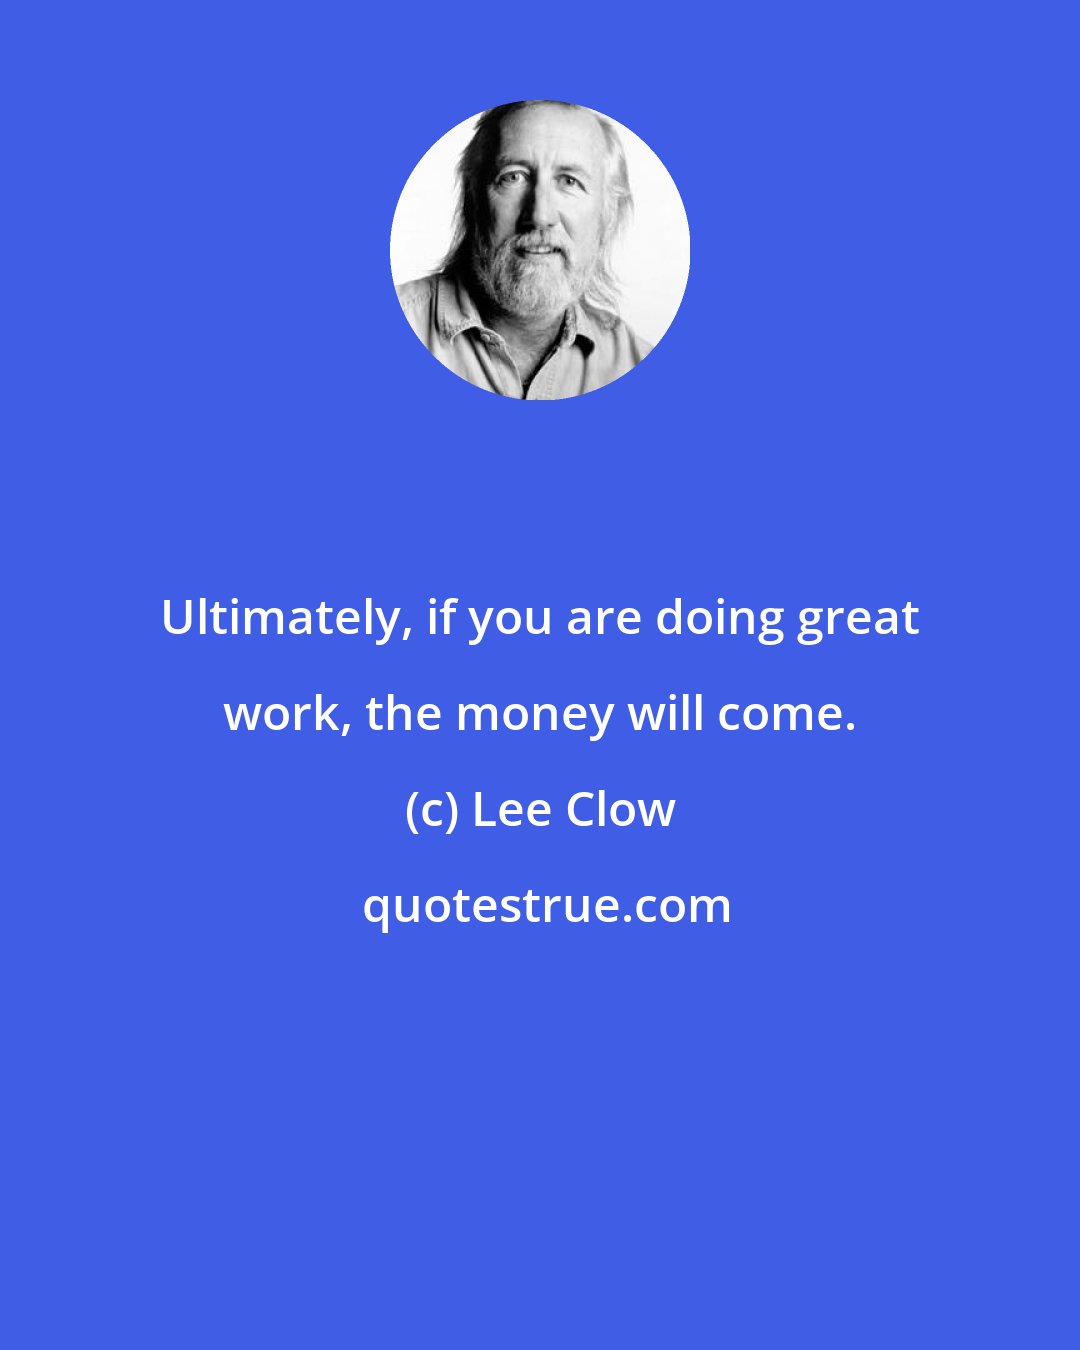 Lee Clow: Ultimately, if you are doing great work, the money will come.